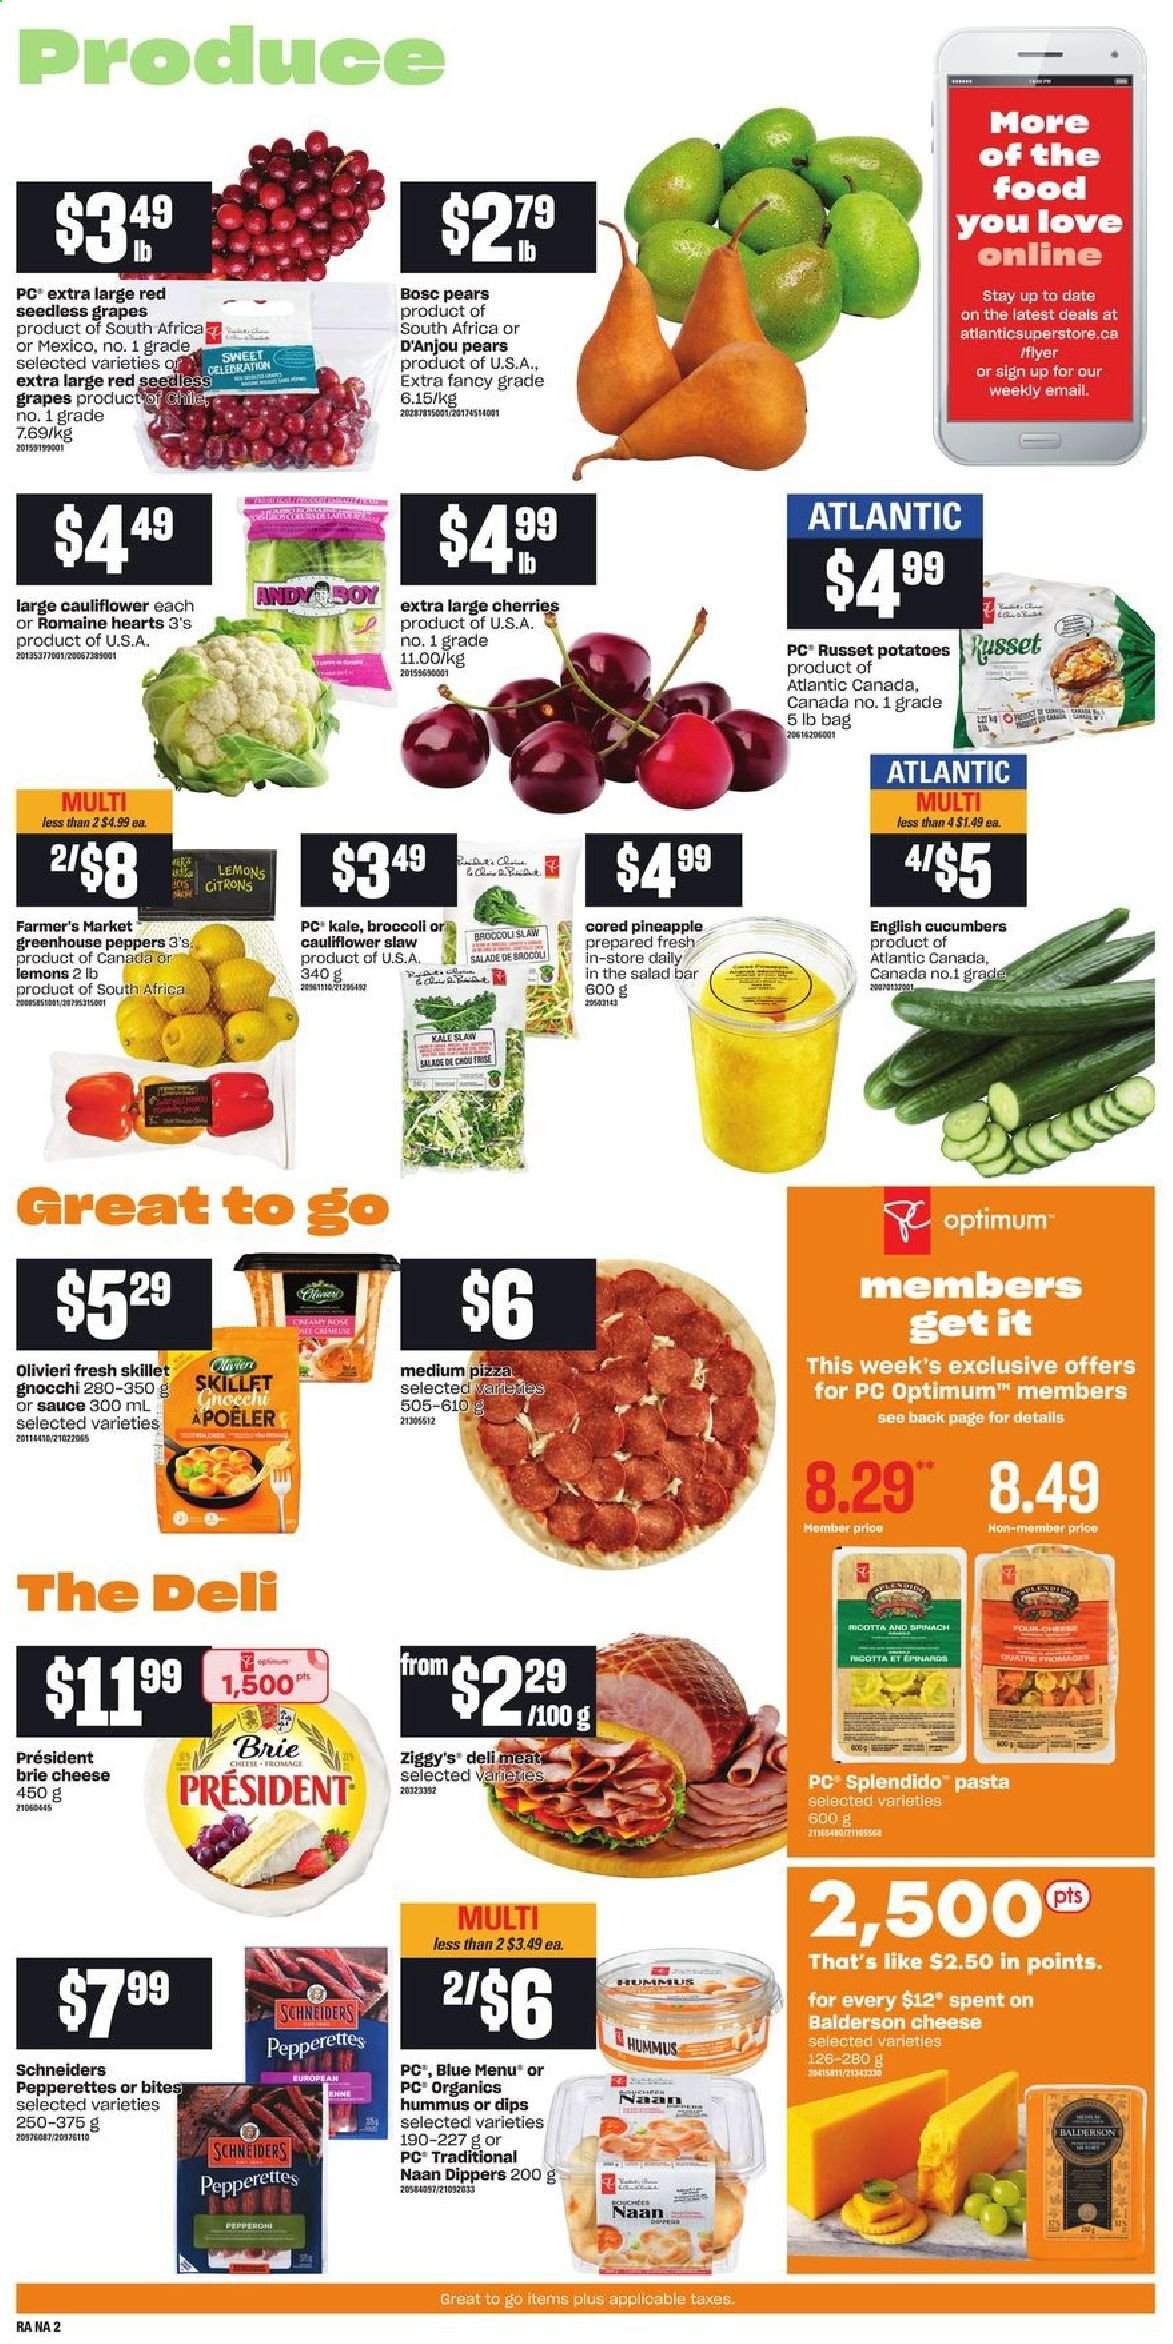 thumbnail - Atlantic Superstore Flyer - May 20, 2021 - May 26, 2021 - Sales products - broccoli, cucumber, russet potatoes, kale, potatoes, salad, peppers, grapes, seedless grapes, pineapple, cherries, pears, lemons, pizza, pasta, hummus, brie, Président, Celebration, Optimum, gnocchi, ricotta. Page 3.